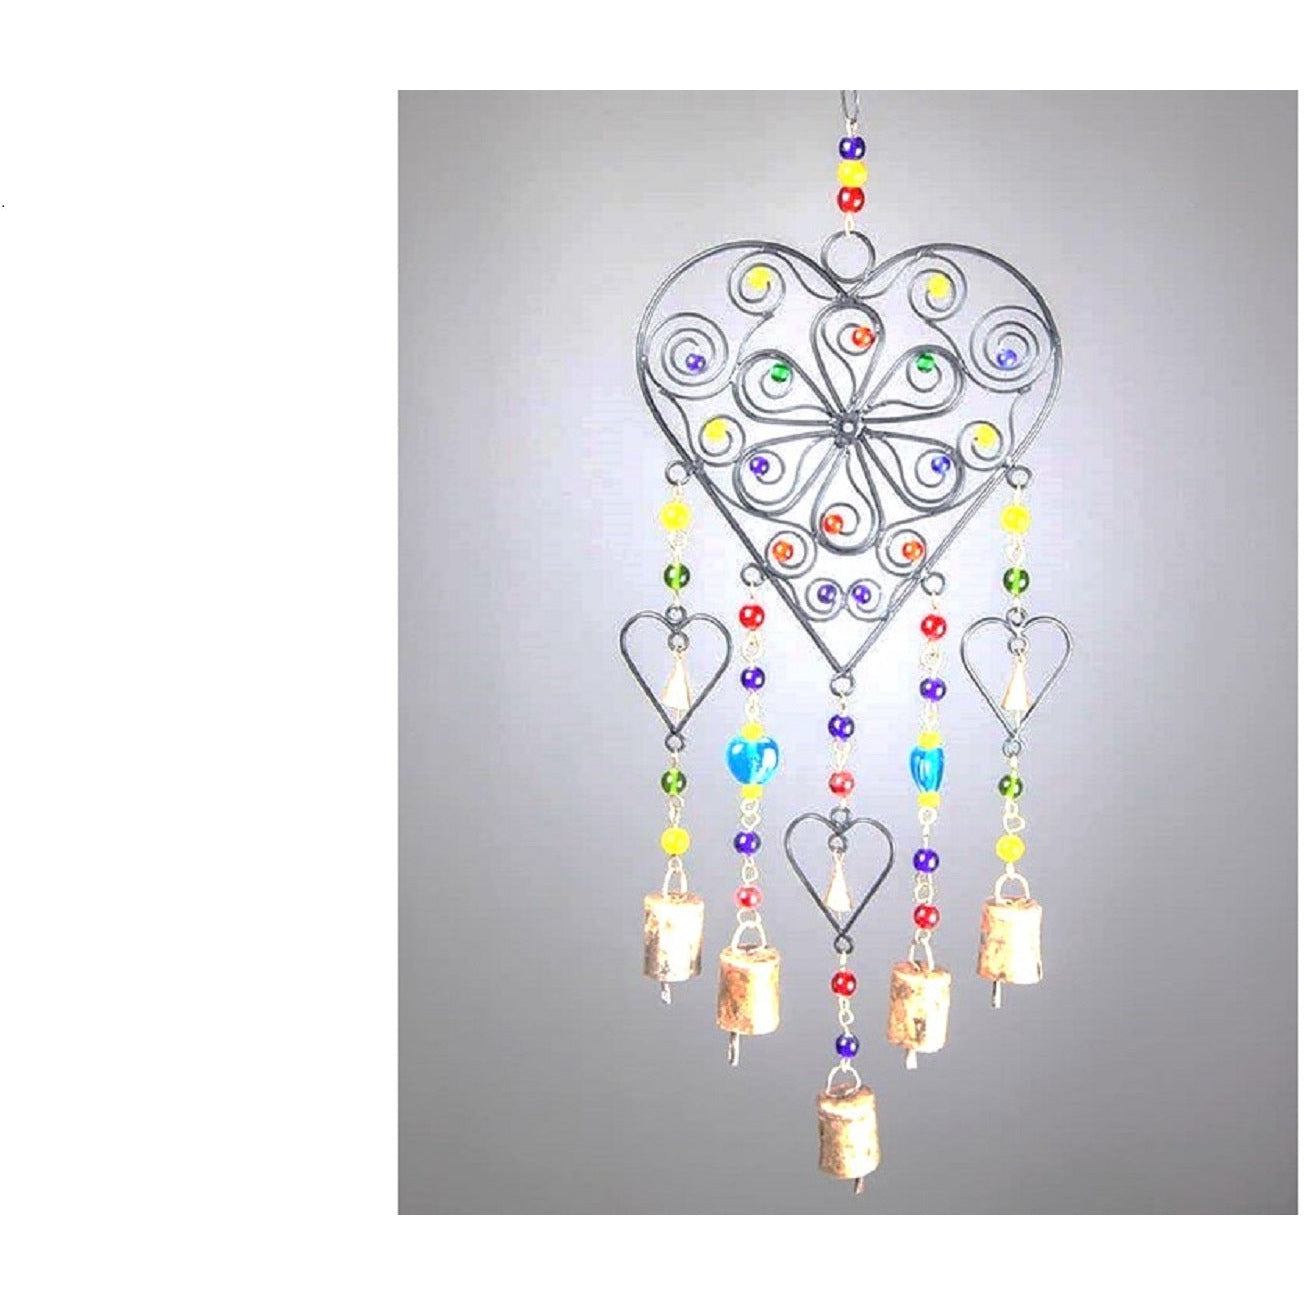 Beaded Heart colored glass chime  home decor  hanging gift by OMSutra